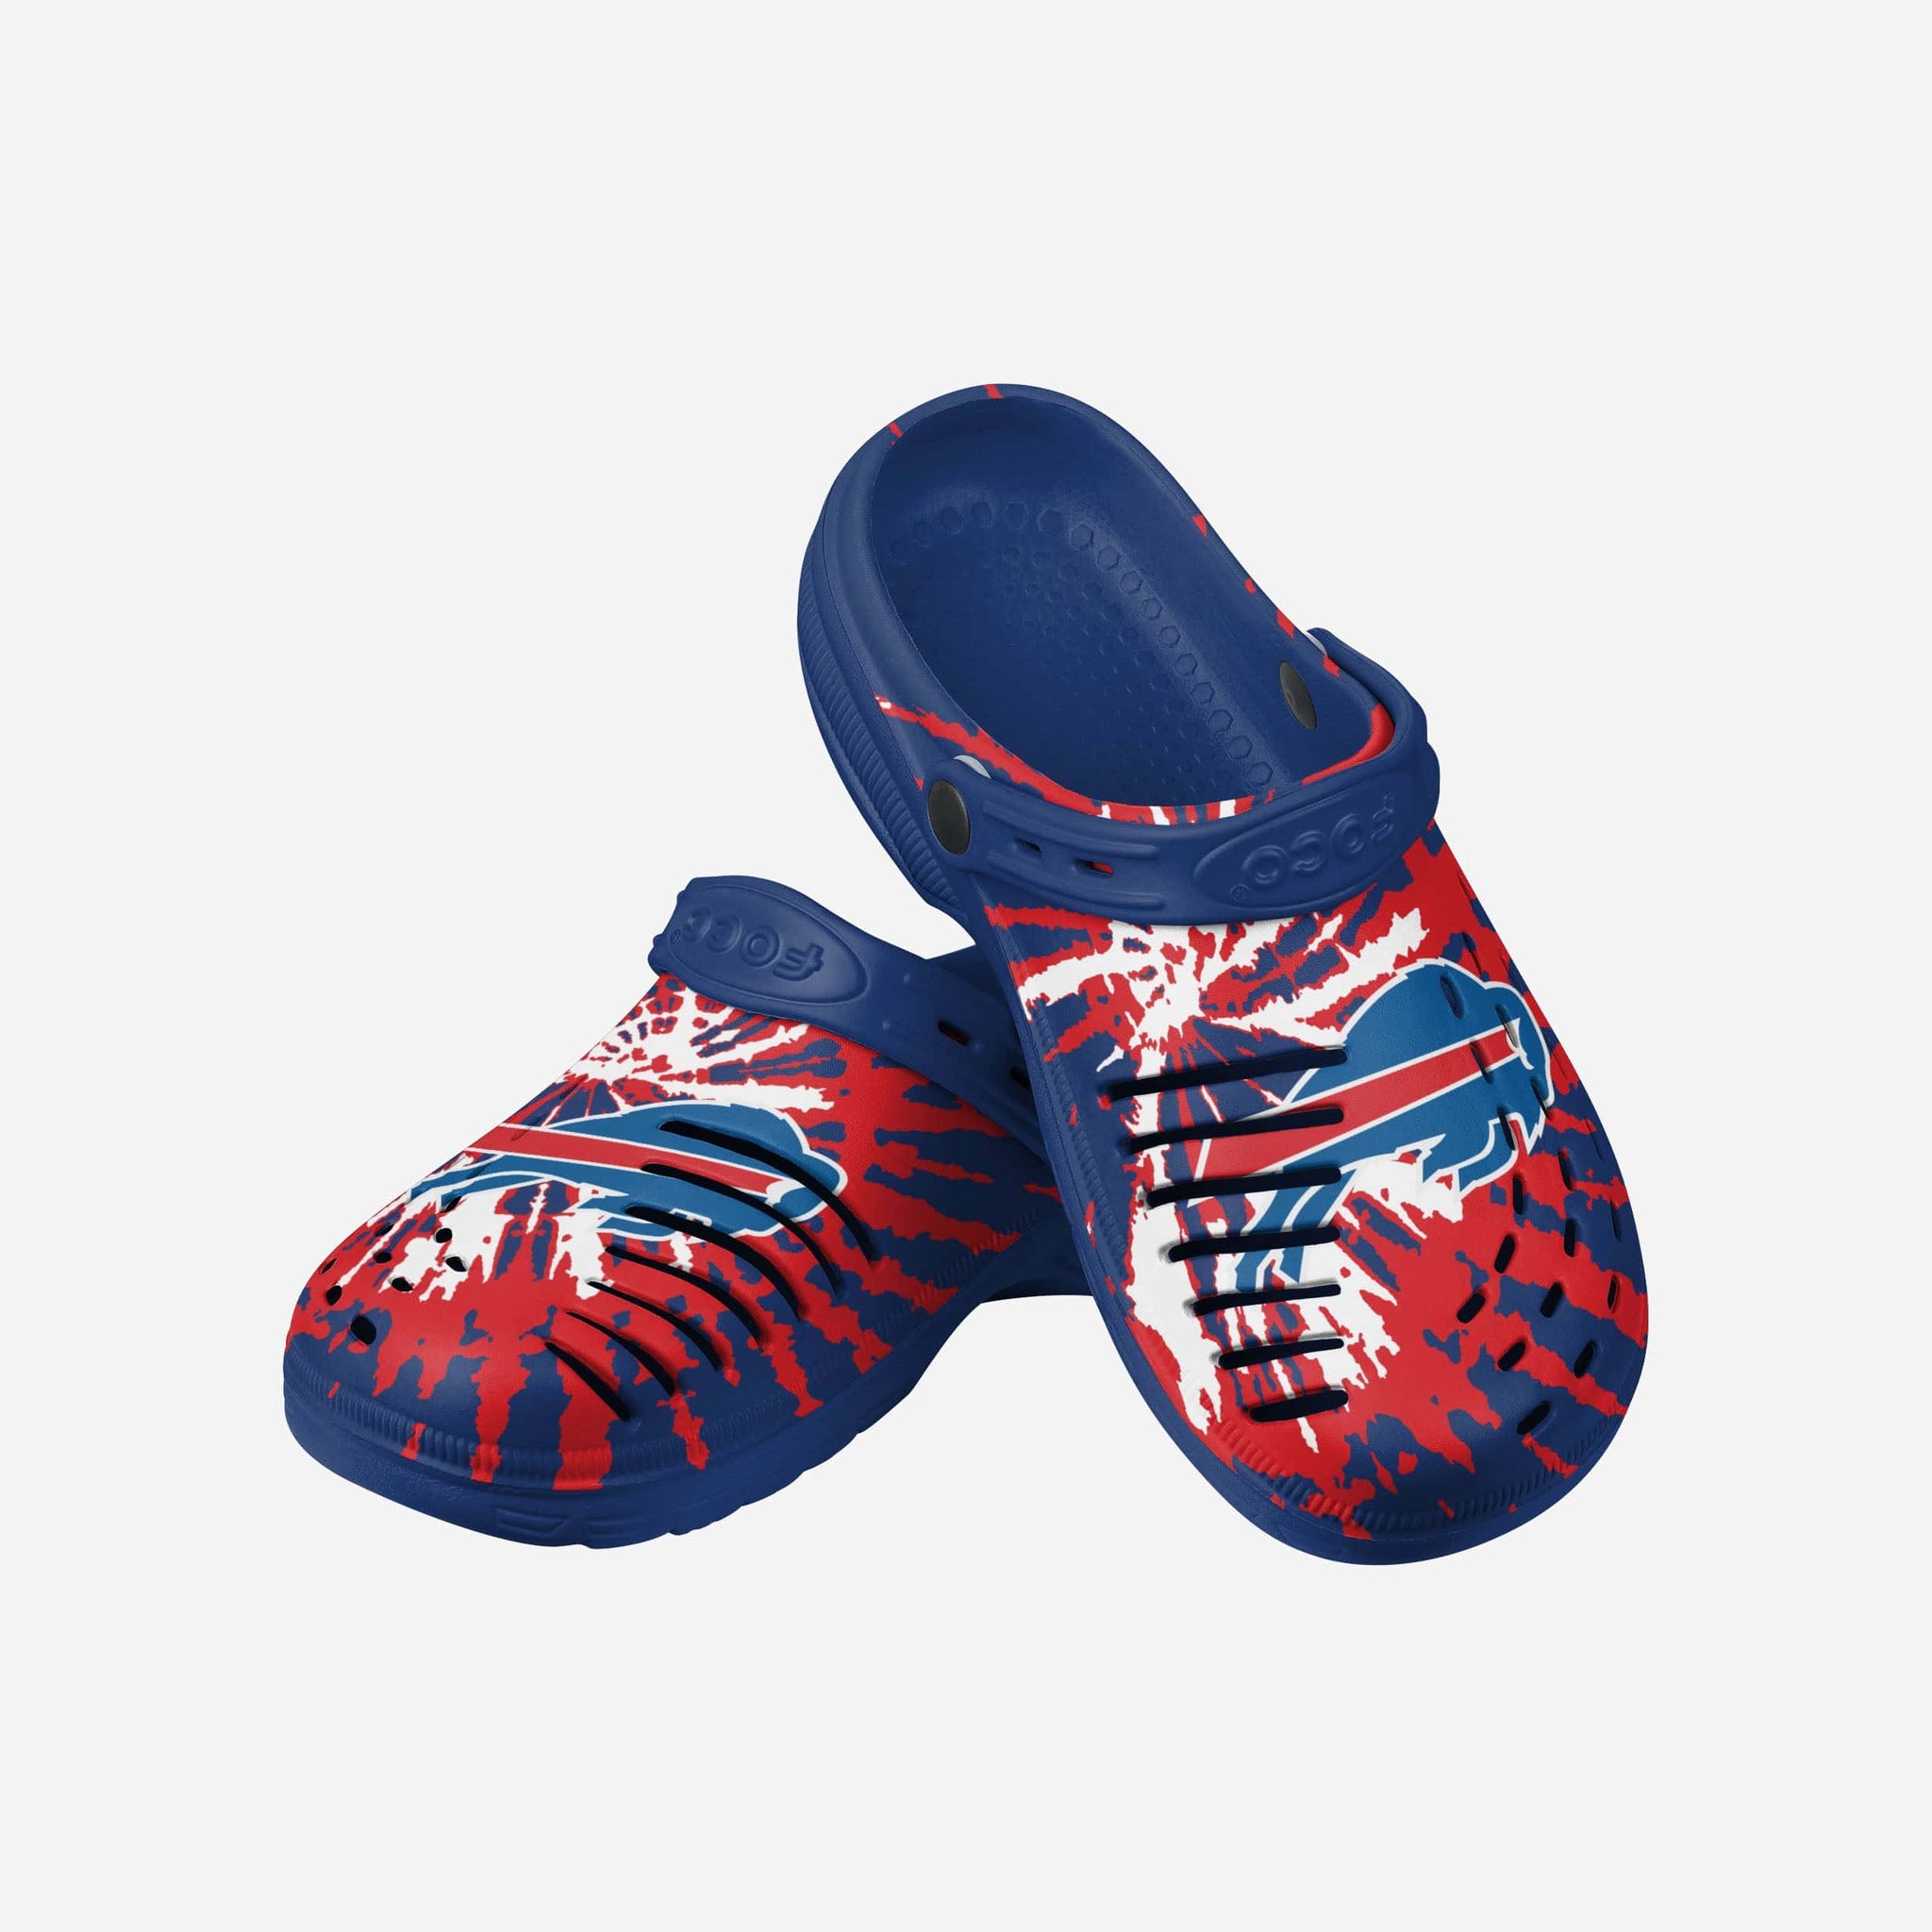 Officially Licensed MLB Youth FOCO Sunny Day Clogs